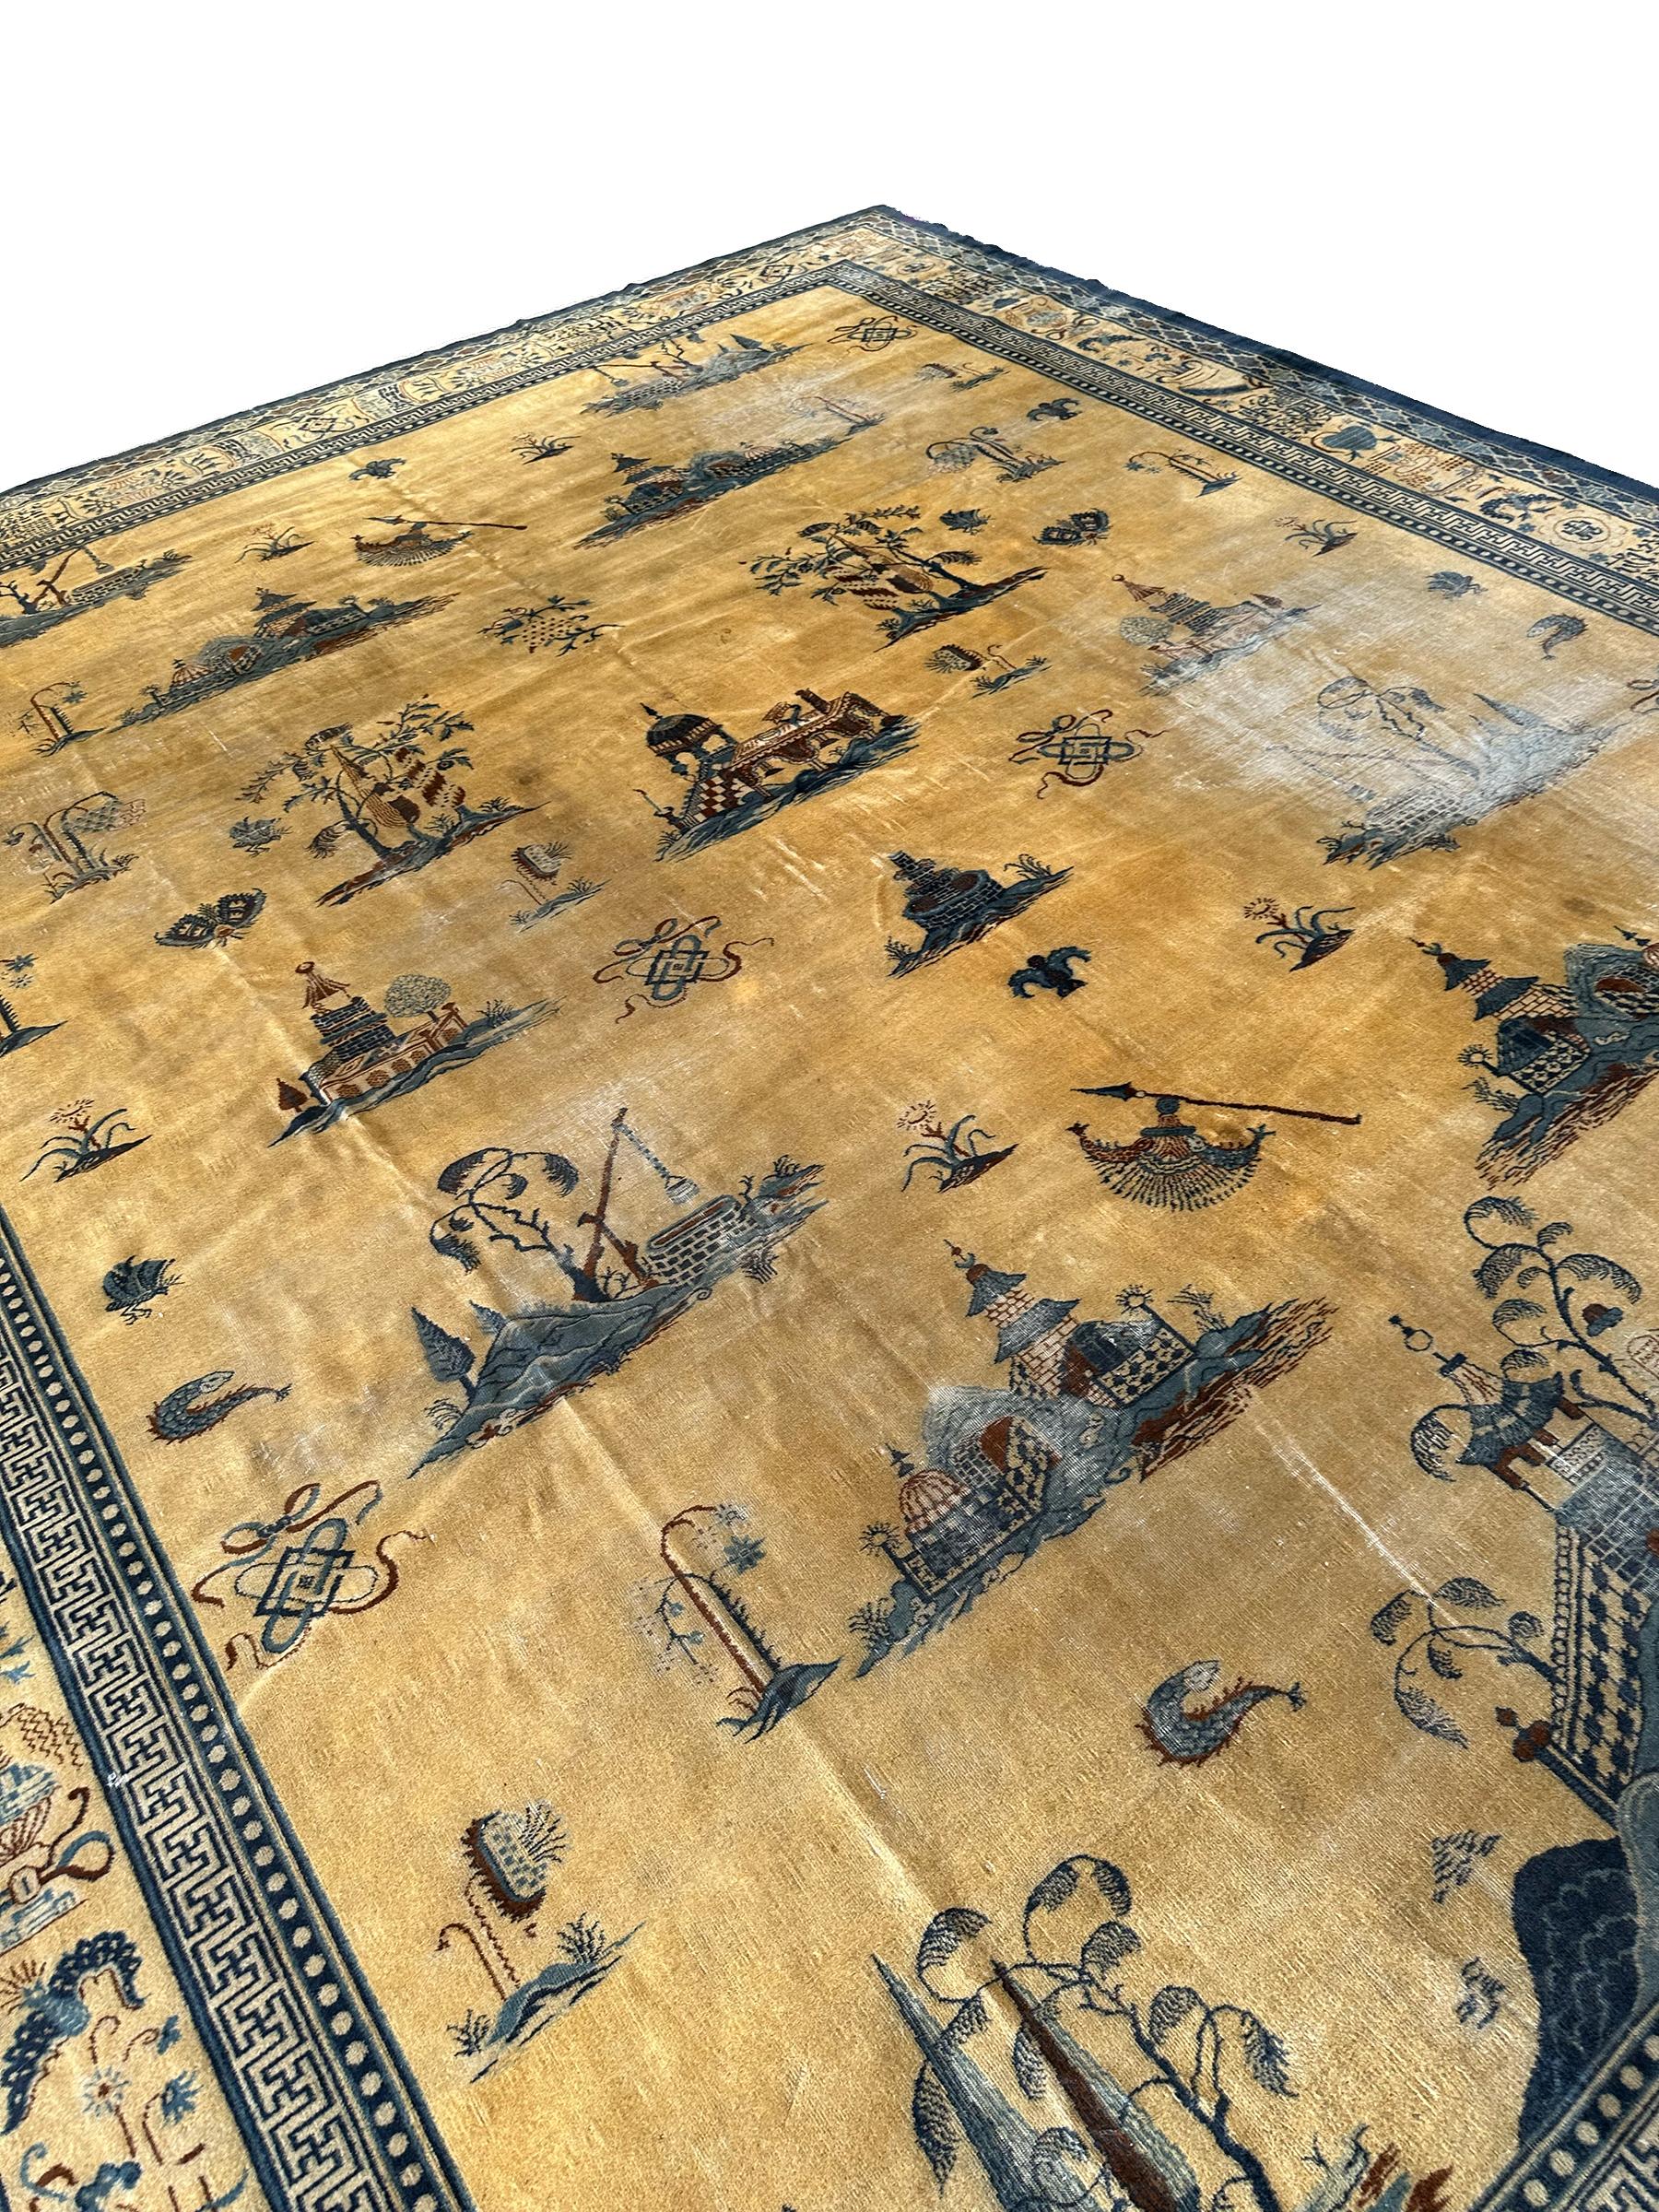 Rare Antique Chinese Rug Pre-1900 Chinese Symbols 12x15 361cm x 427cm Pre-1900 For Sale 6